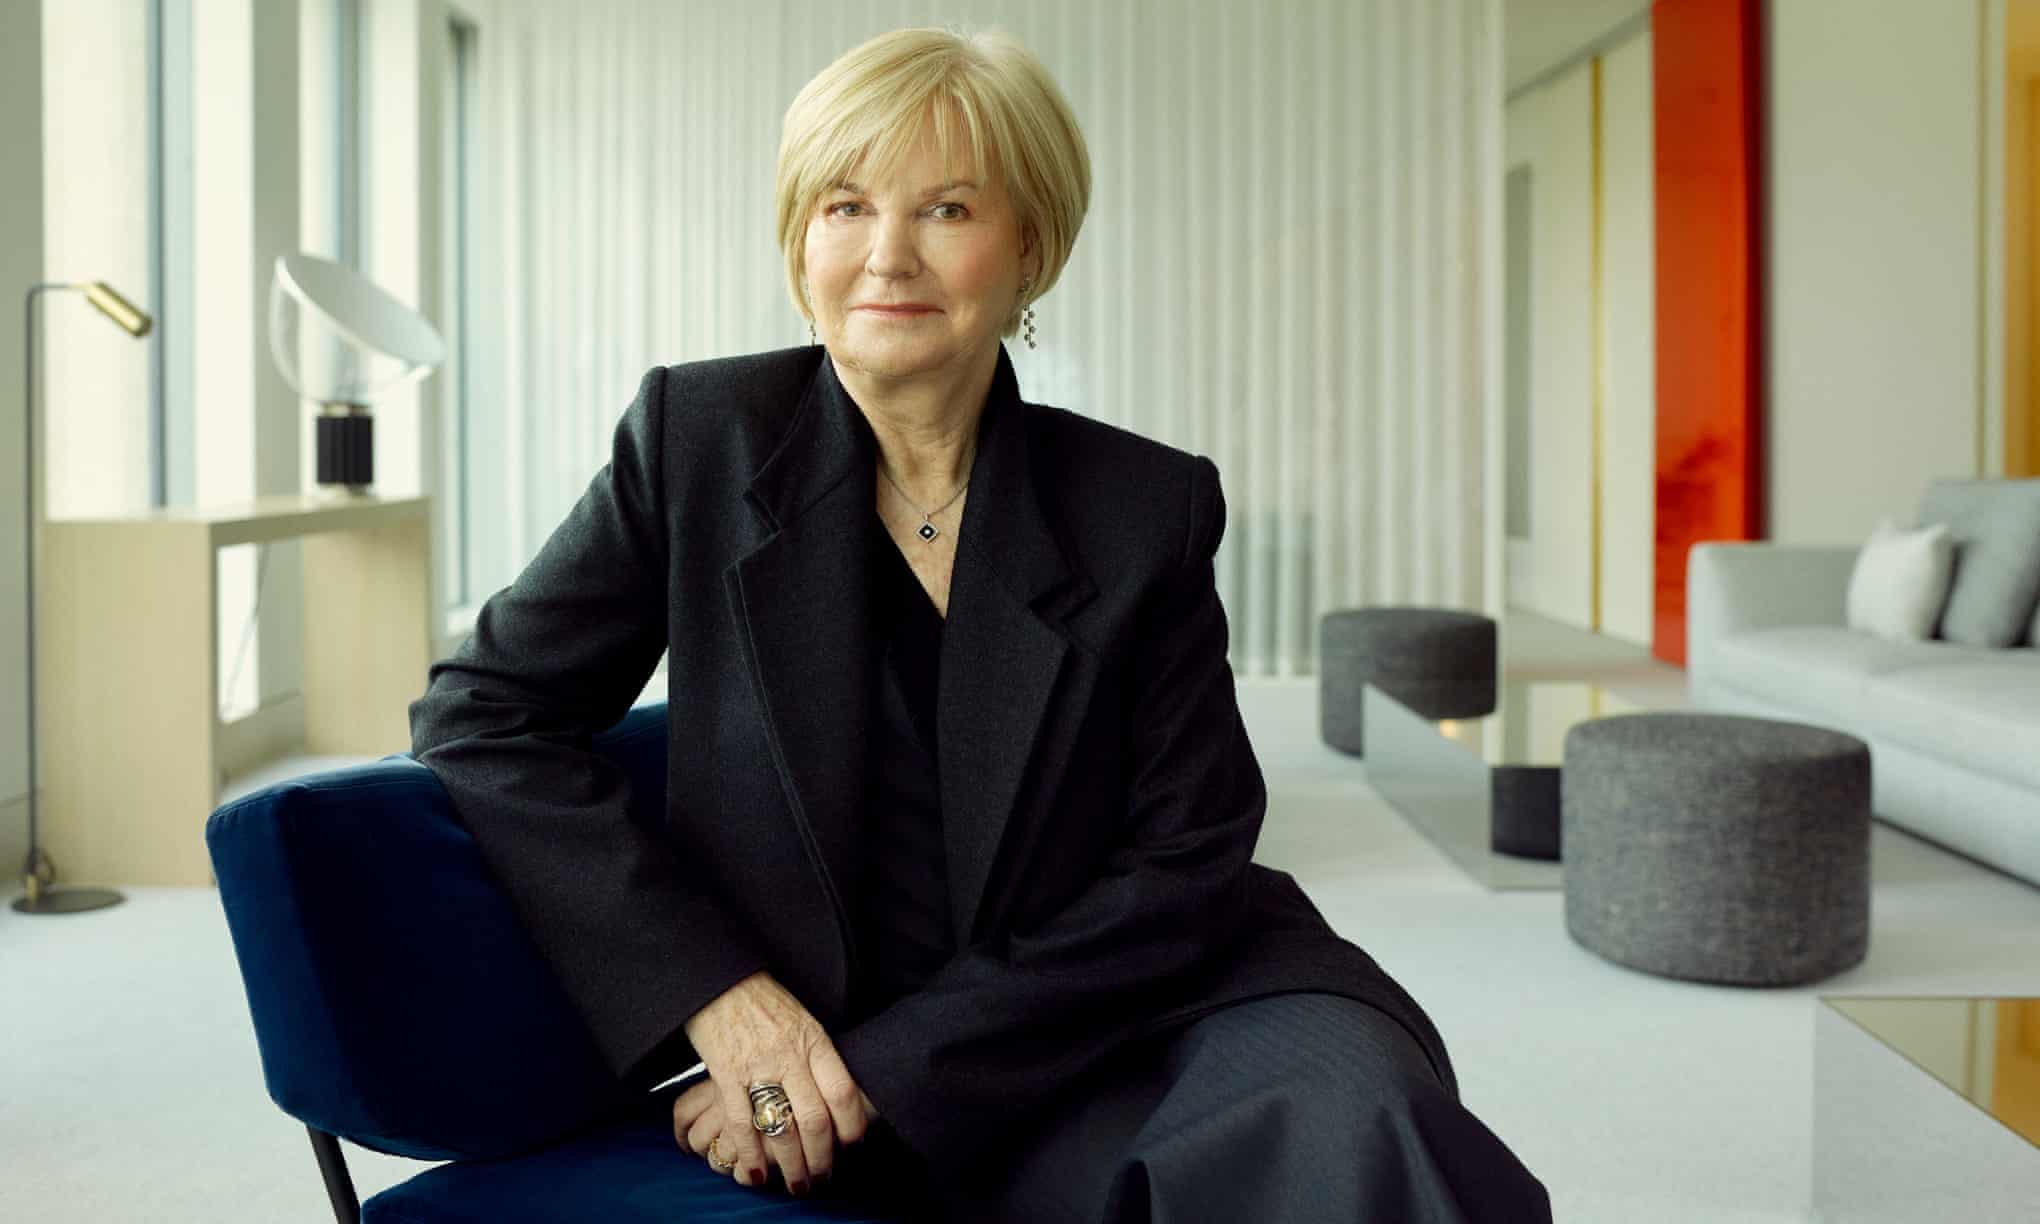 Selfridges boss Anne Pitcher: ‘I would like fashion to slow down’